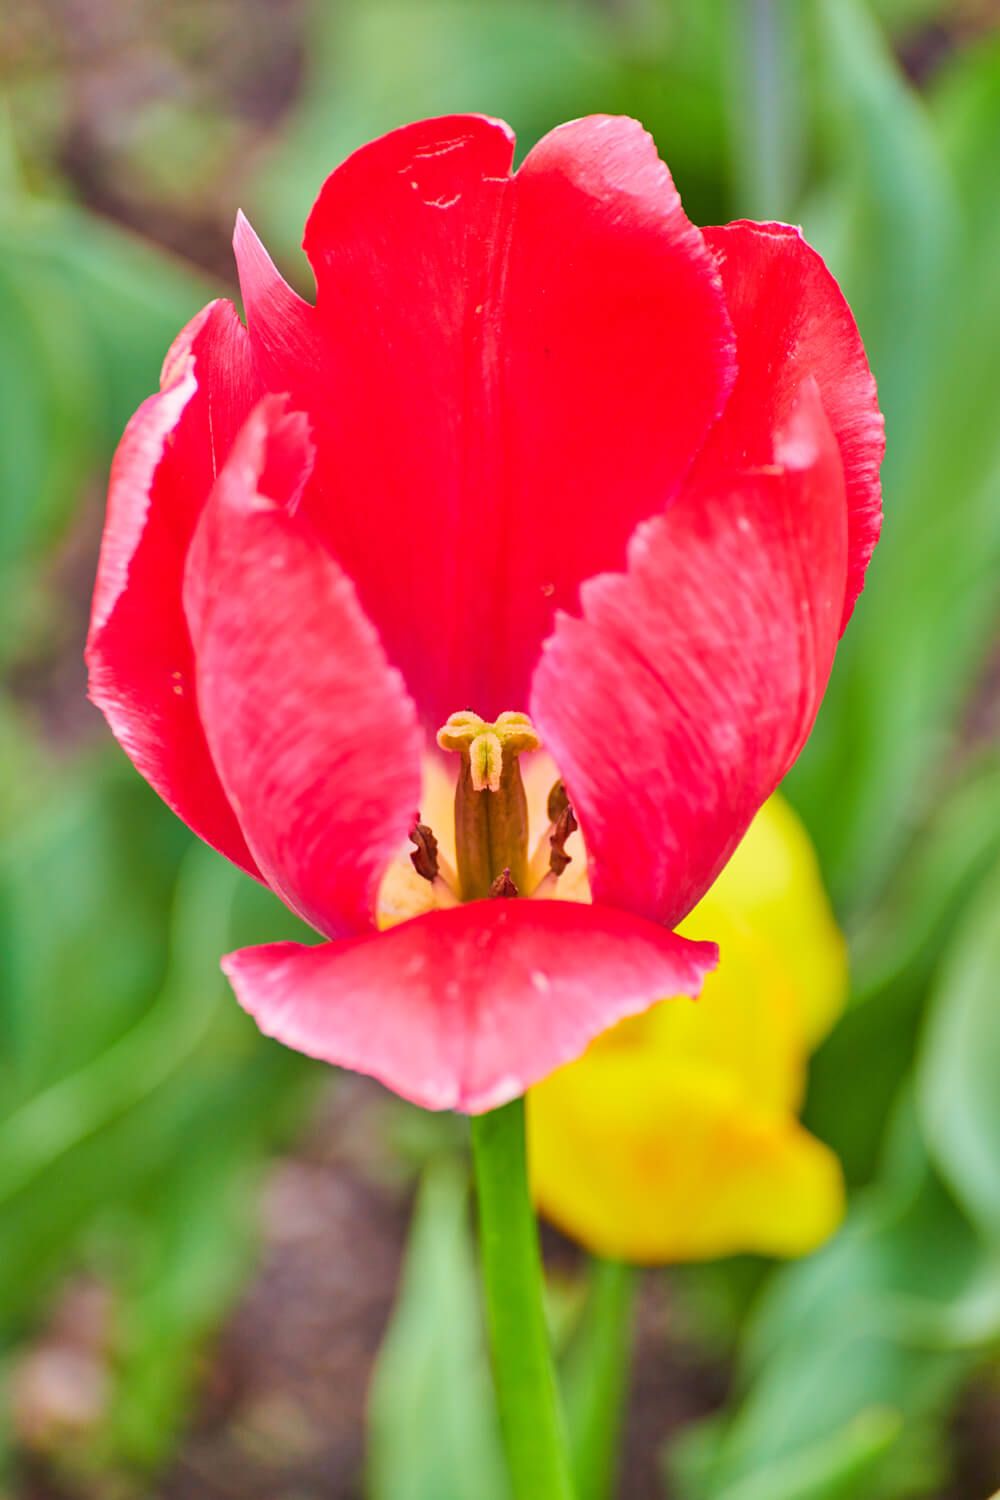 Up close inside a red tulip